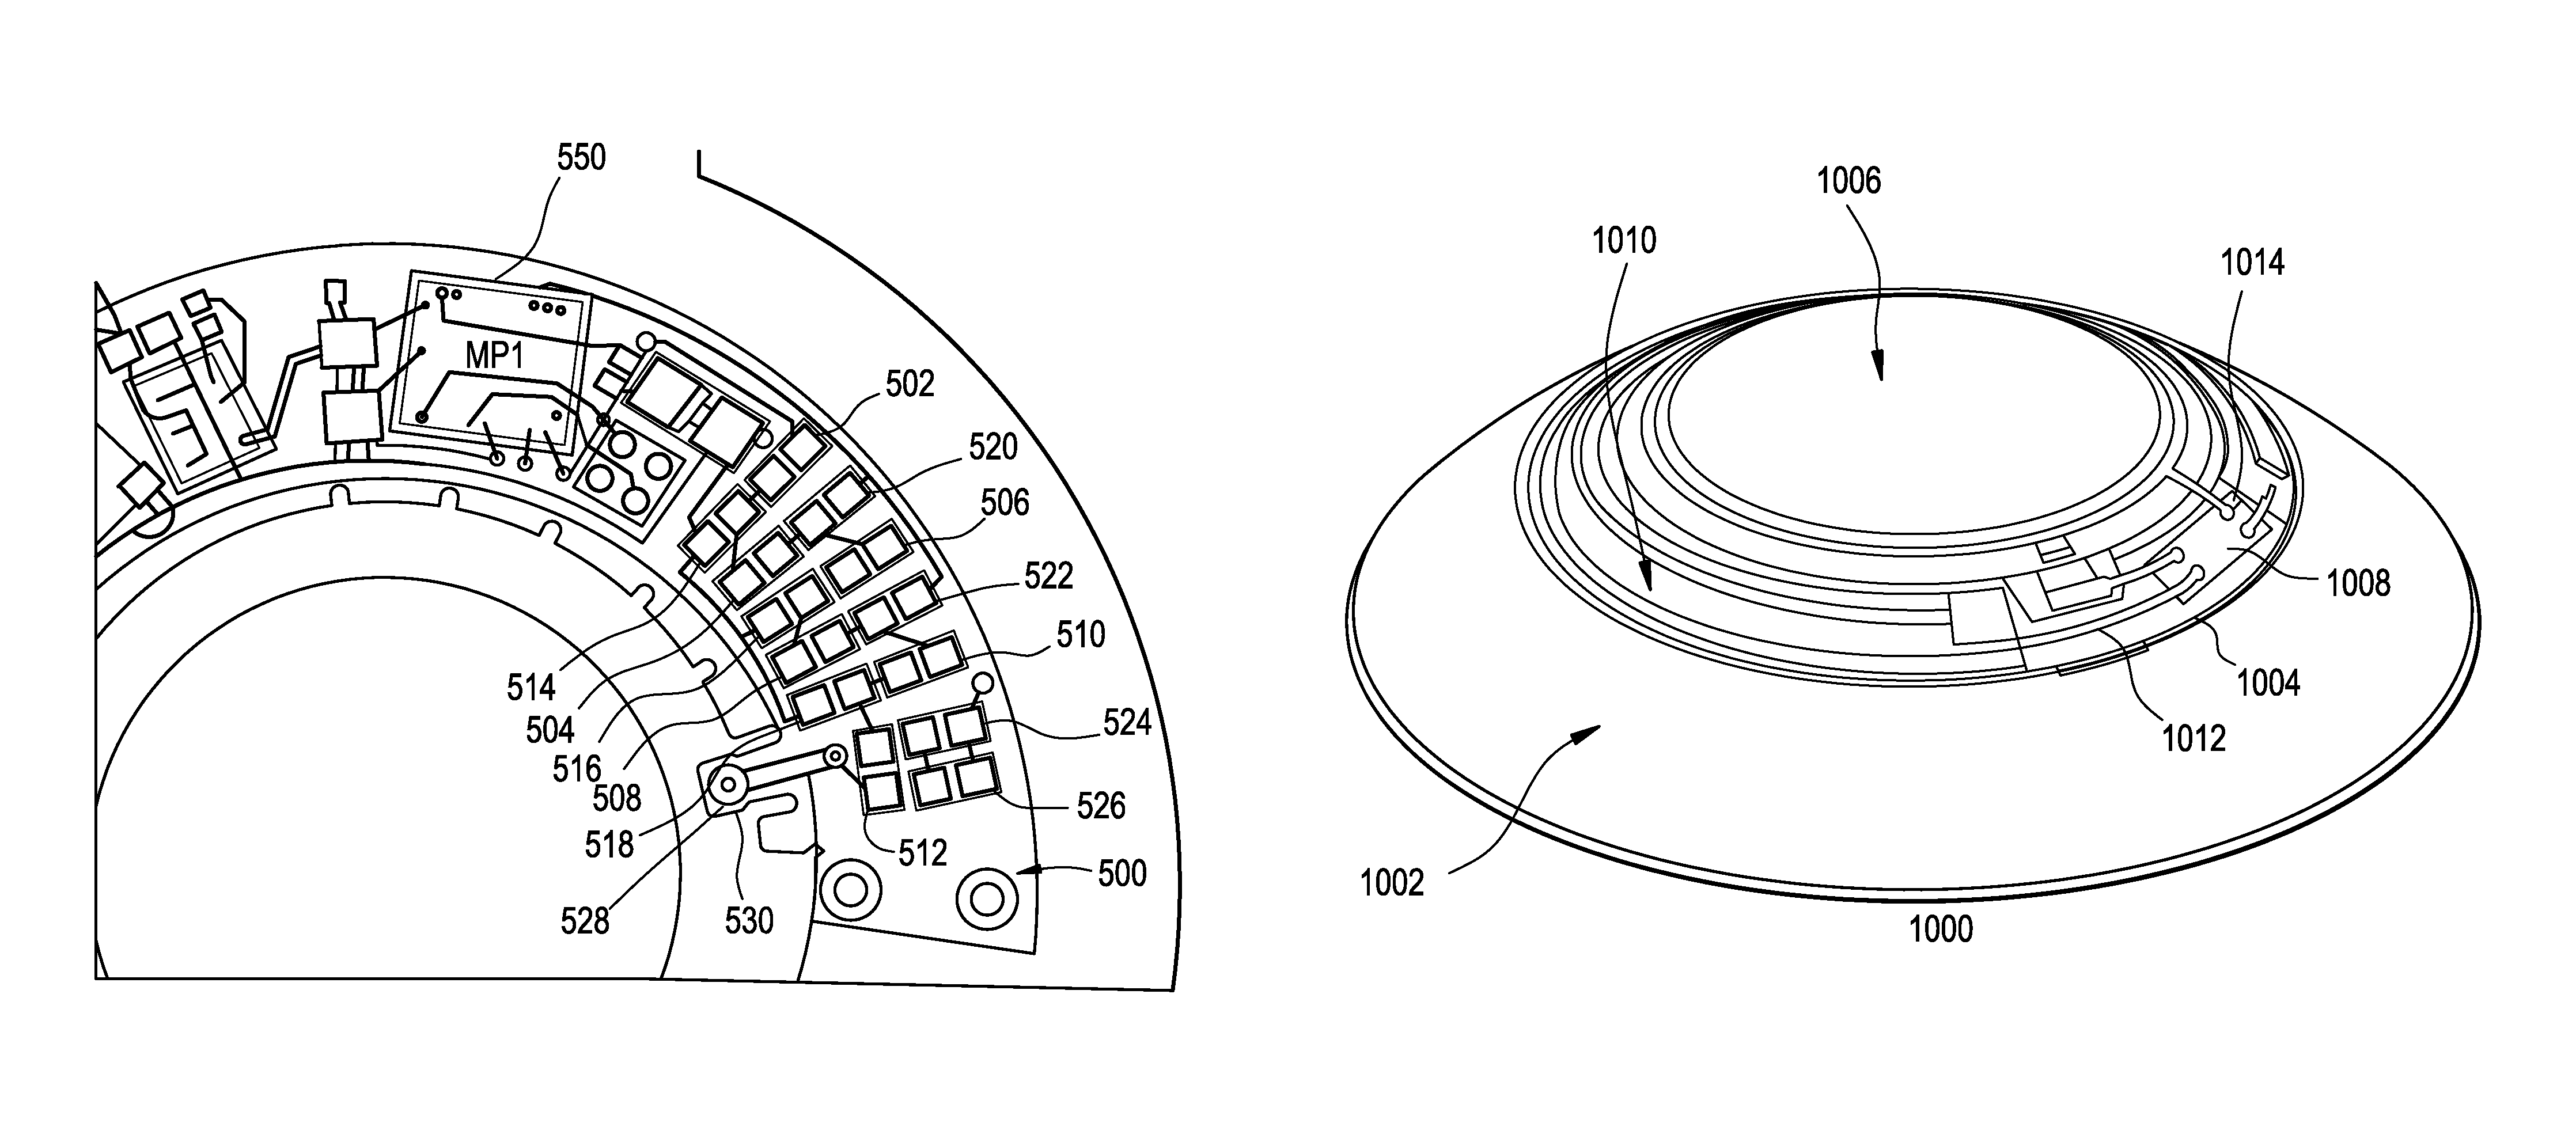 Lens driver for variable-optic electronic ophthalmic lens